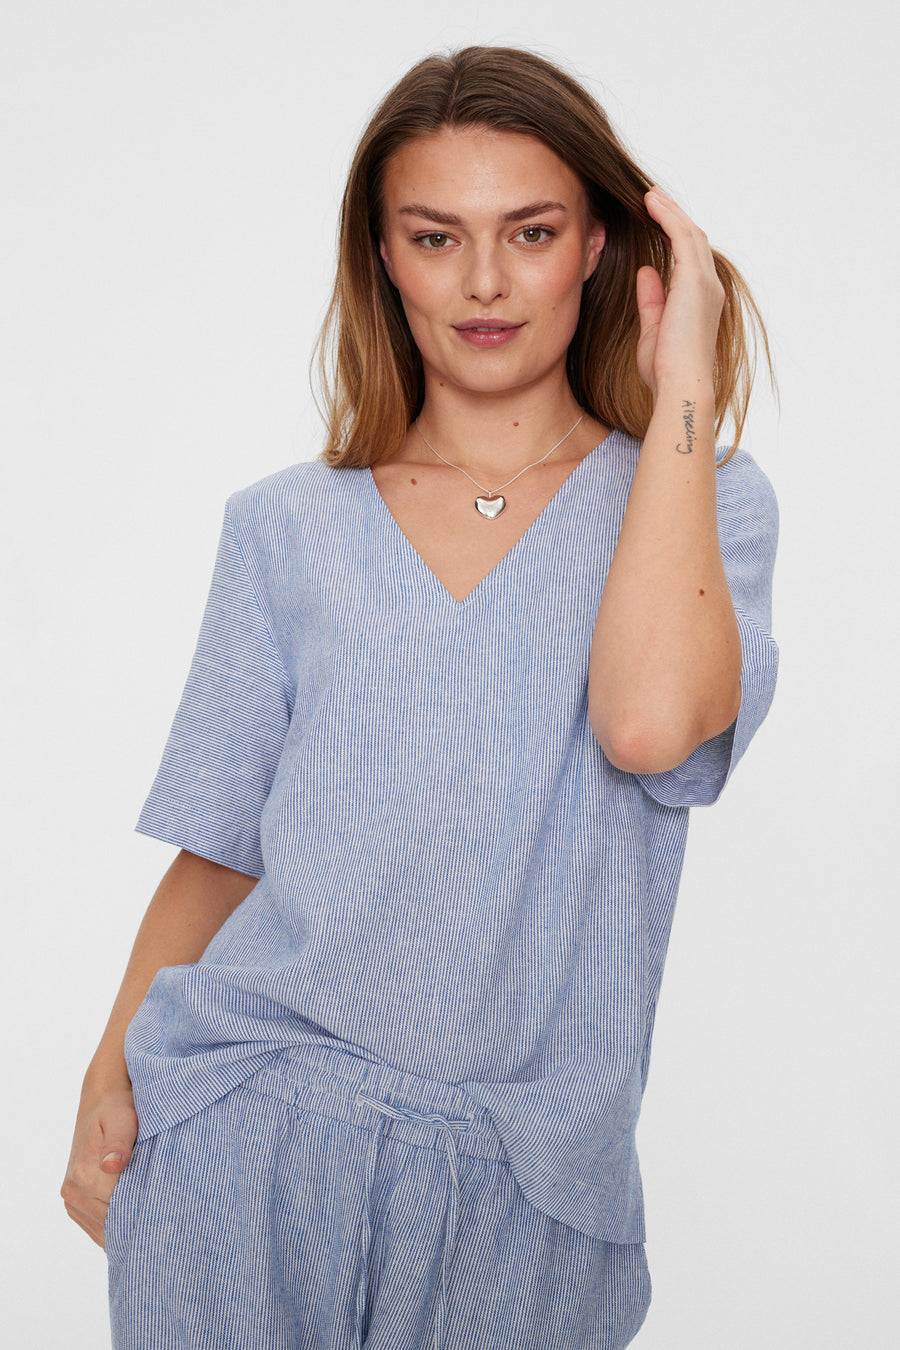 FQLAVA - LINEN BLOUSE WITH STRIPES - WHITE AND BLUE